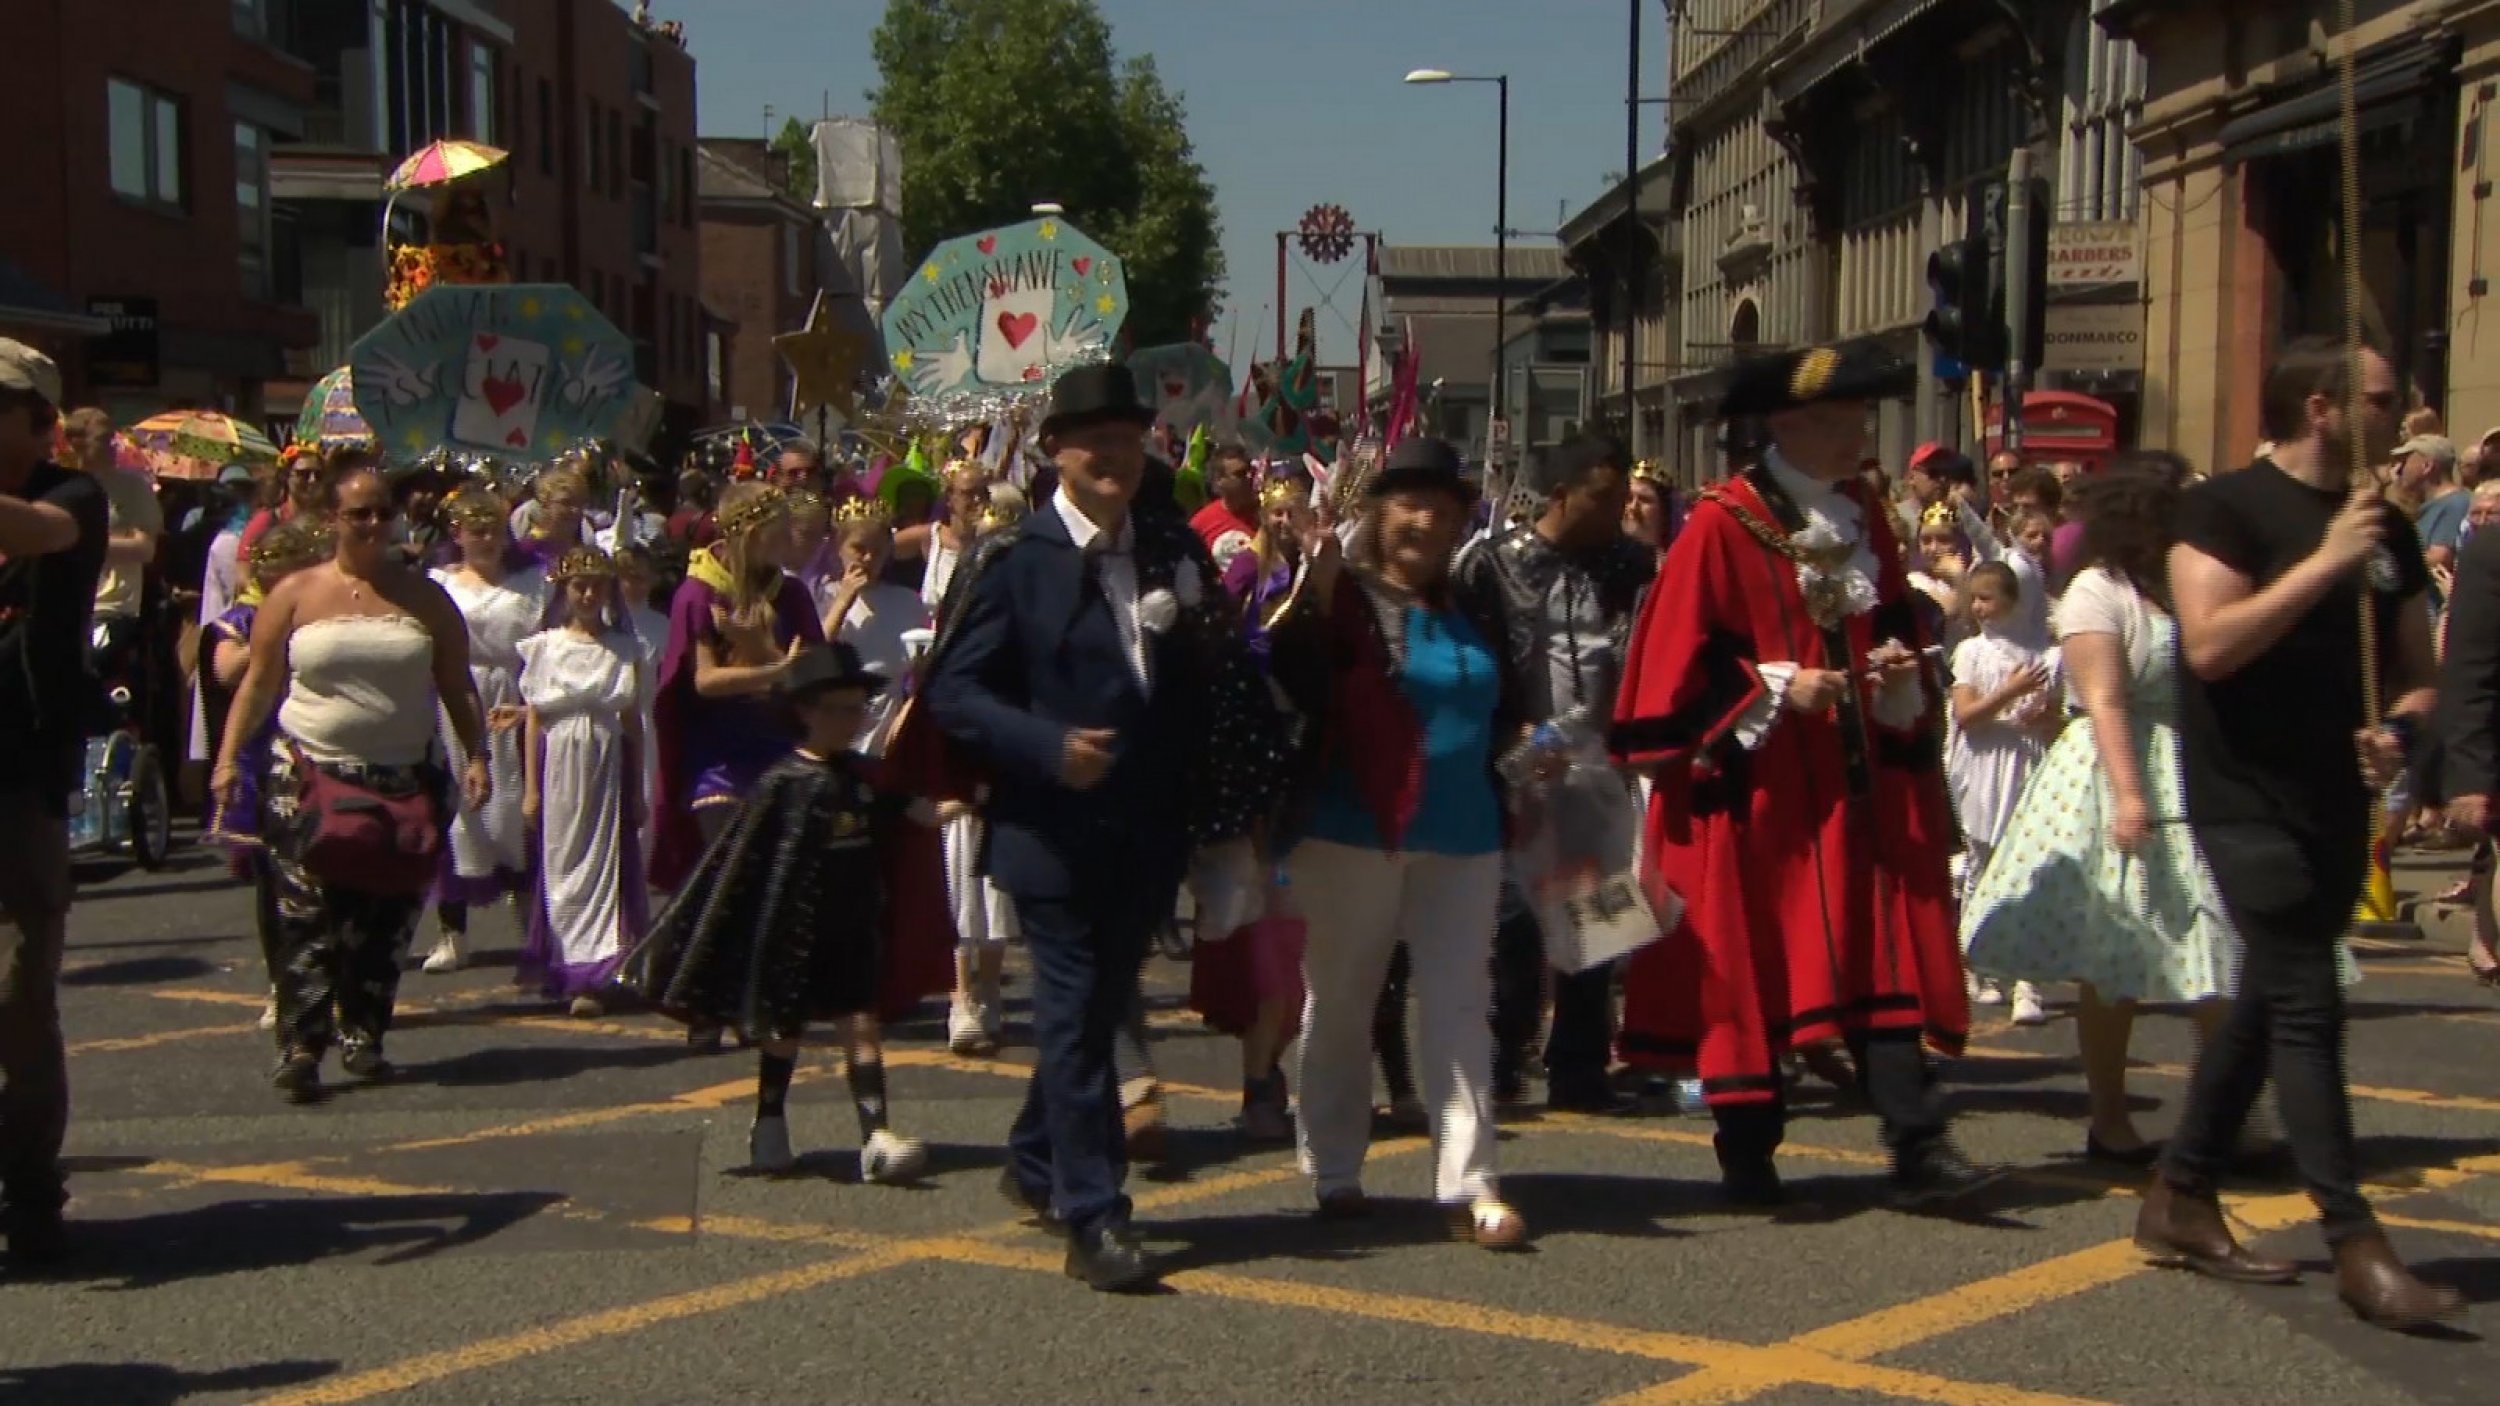 Thousands Line Manchester Streets For Unity Parade After Terror Attack